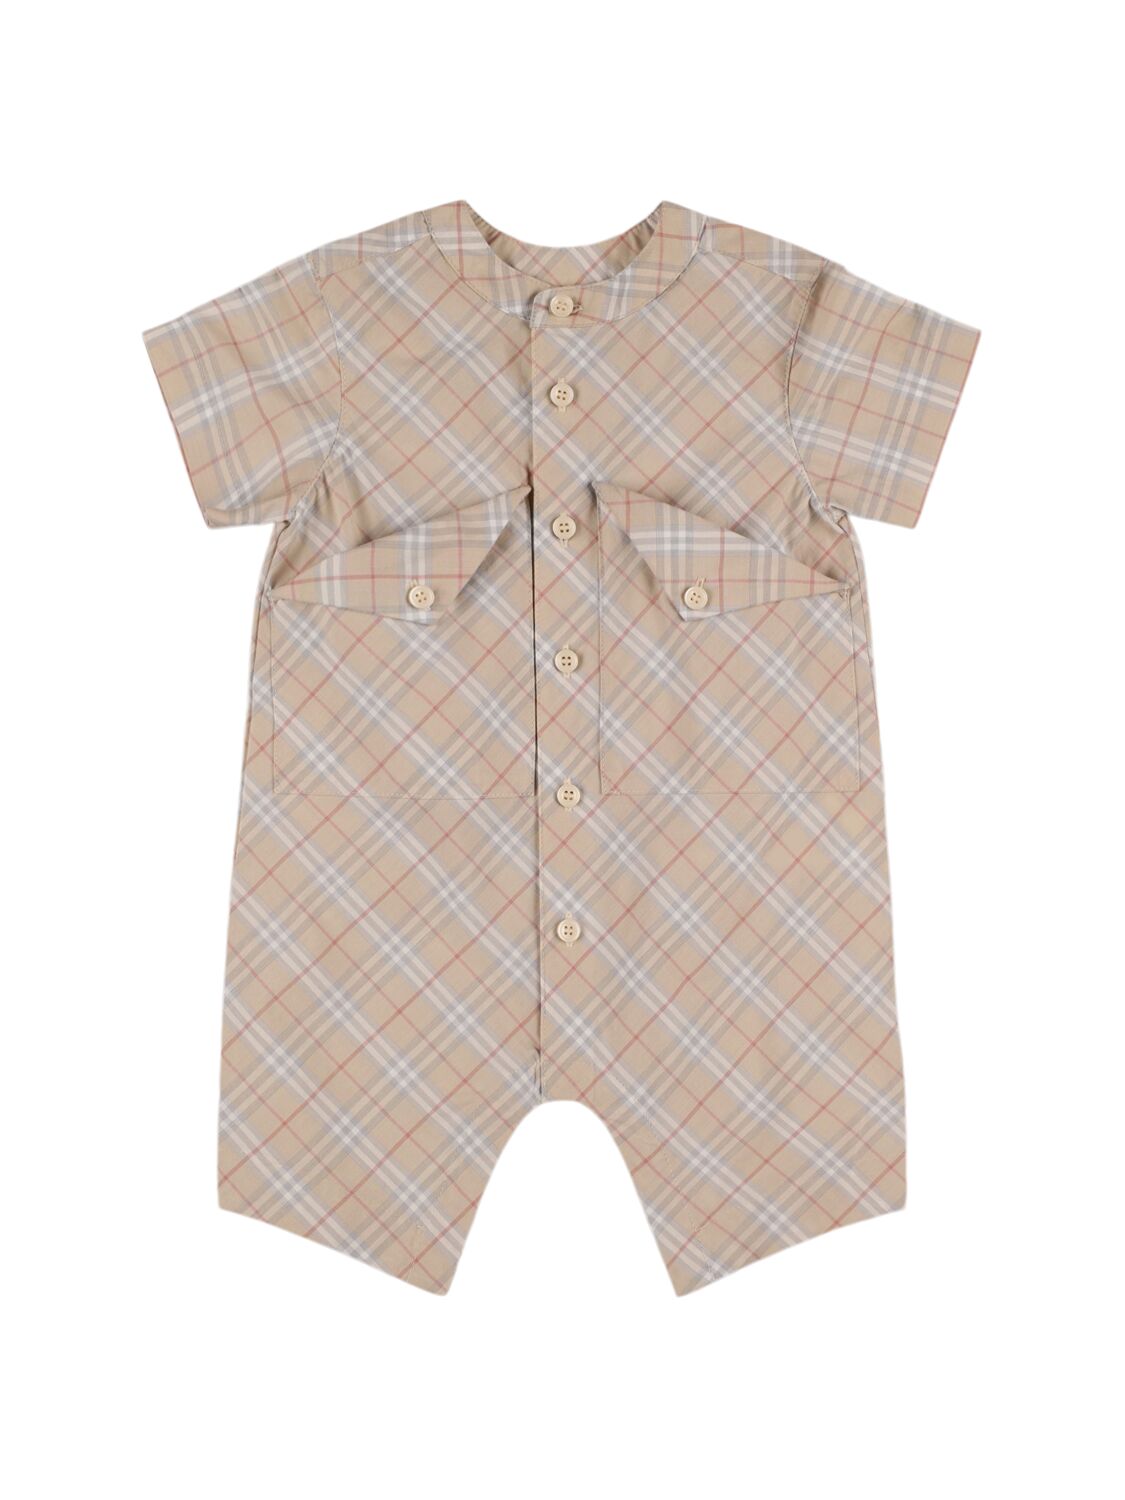 Burberry Babies' Check Print Cotton Jersey Romper In Neutral